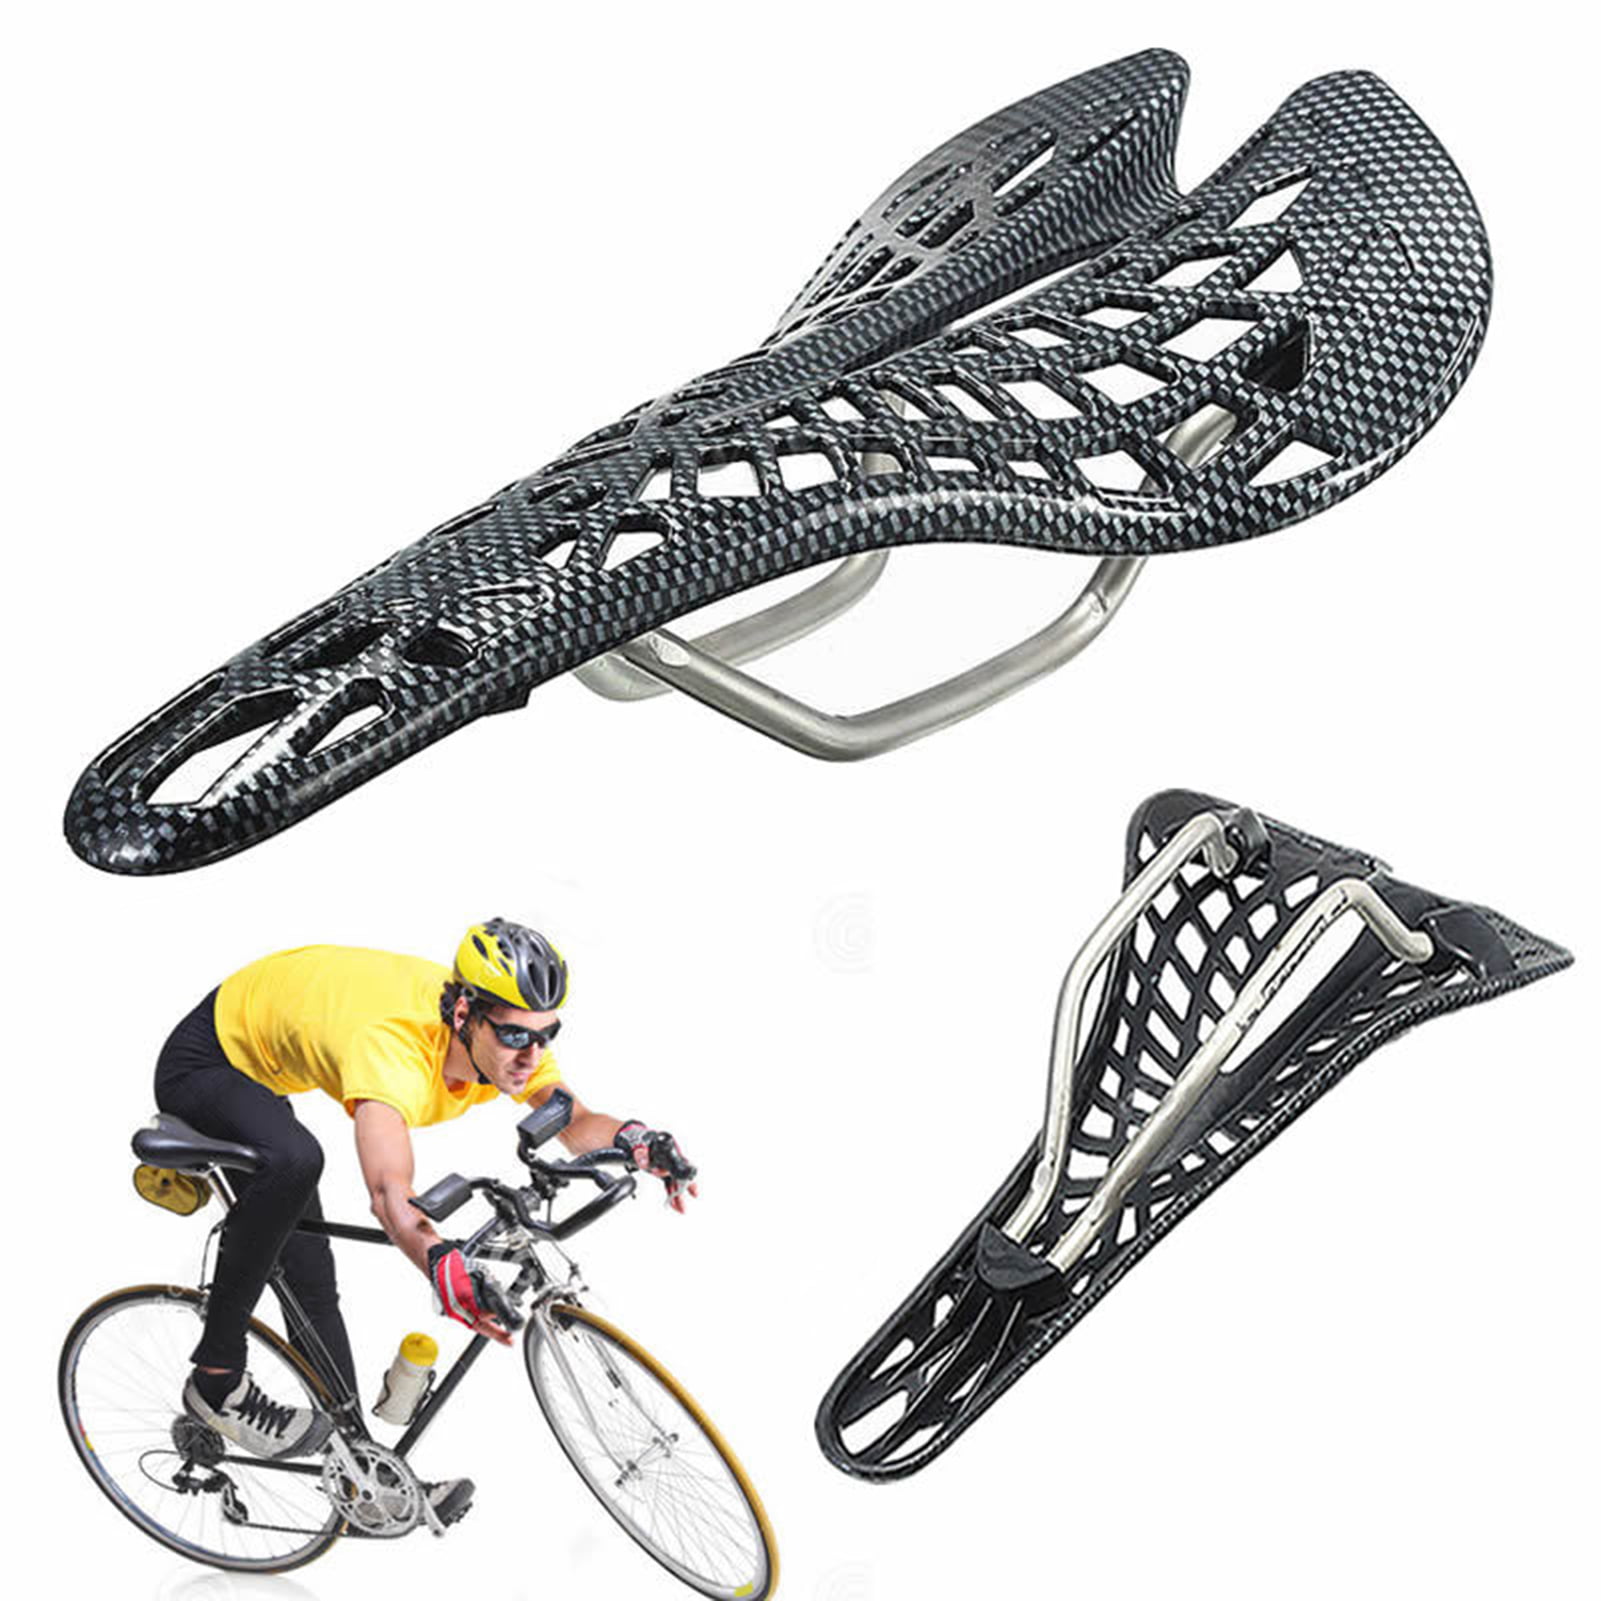 Saddle Seat Hollow Carbon Fiber For Road Racing Bicycle Bike Mtb Cycling Cushion